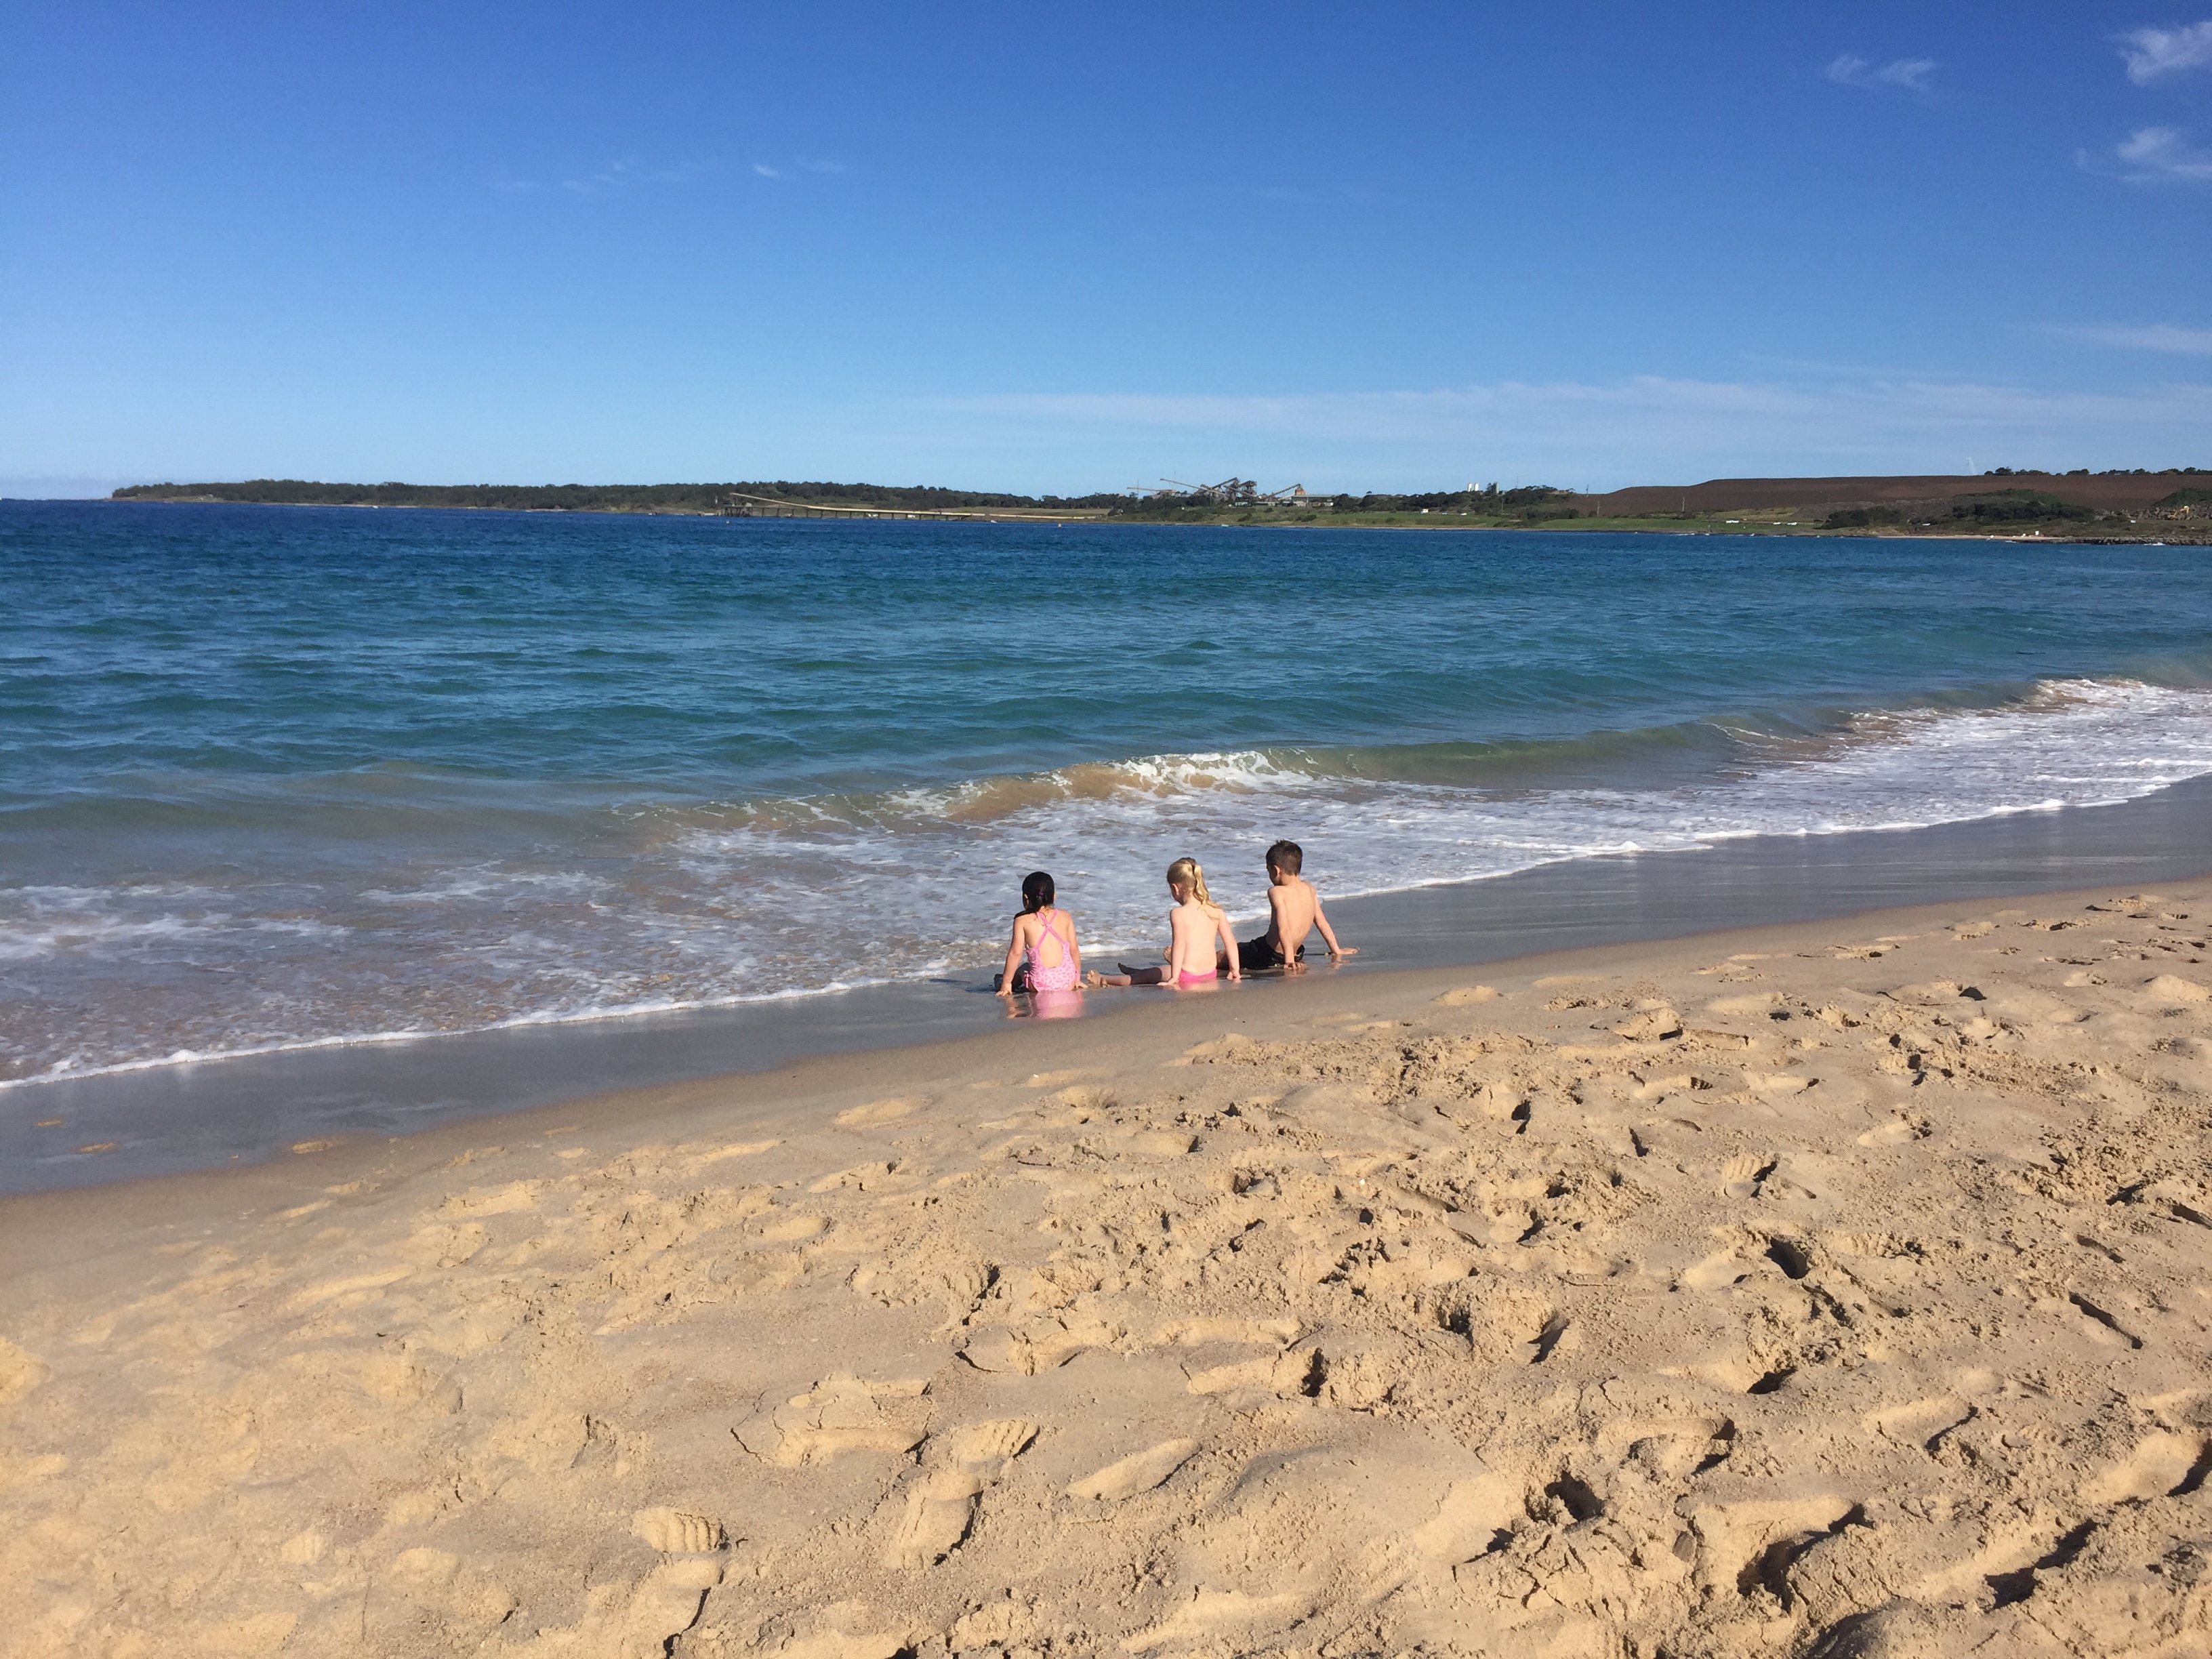 https://cdn.shellharbour.nsw.gov.au/sites/default/files/Things_to_do_images/beachespools.jpeg